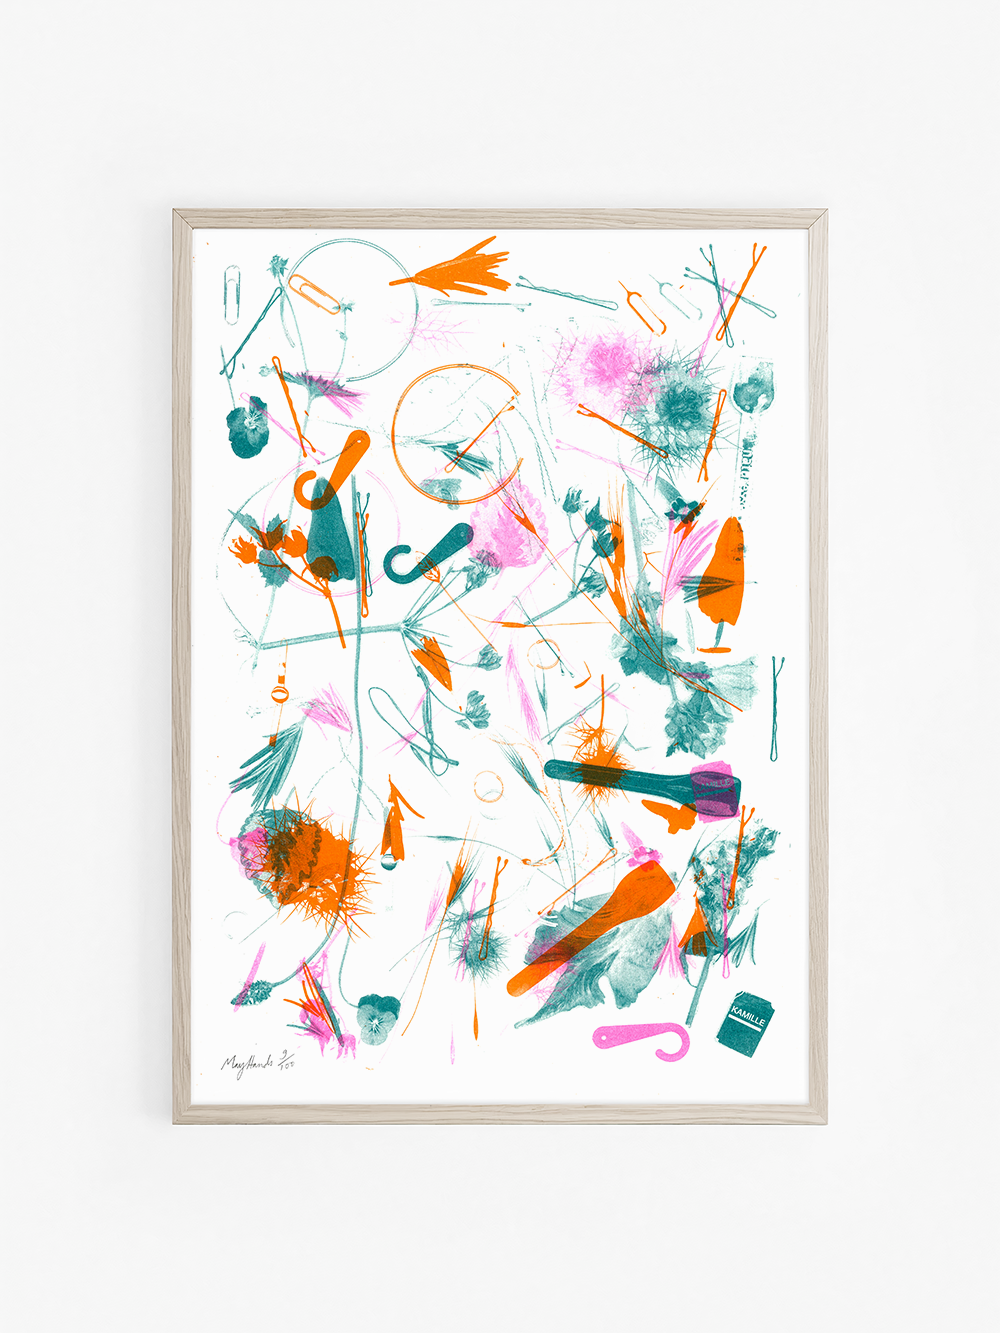  May Hands, Scattered Objects, Ellipsis Prints 